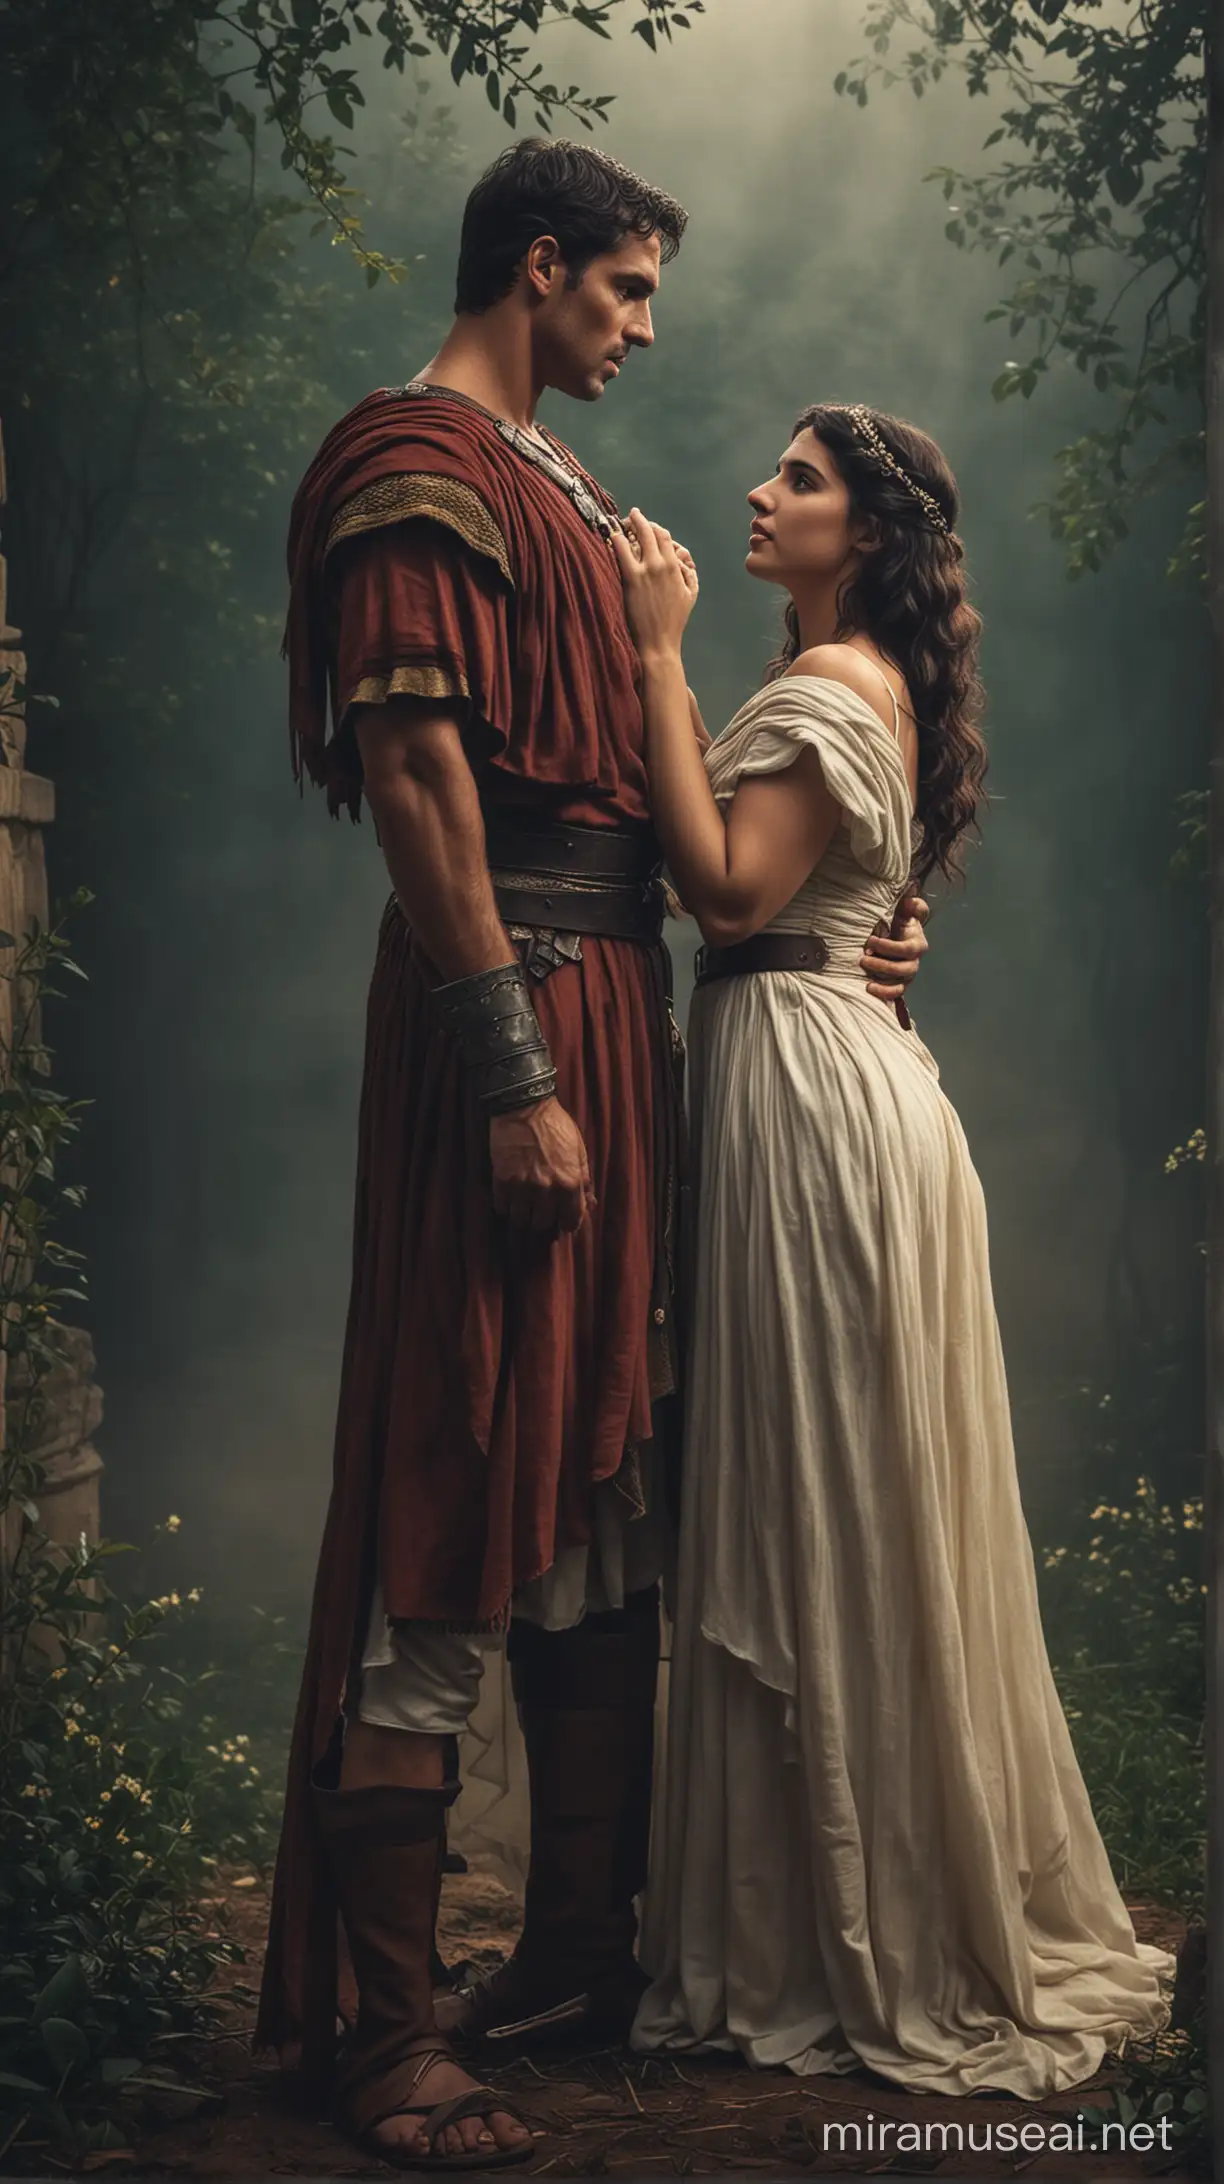 Mark Antony and Octavia in love and romance in moody background